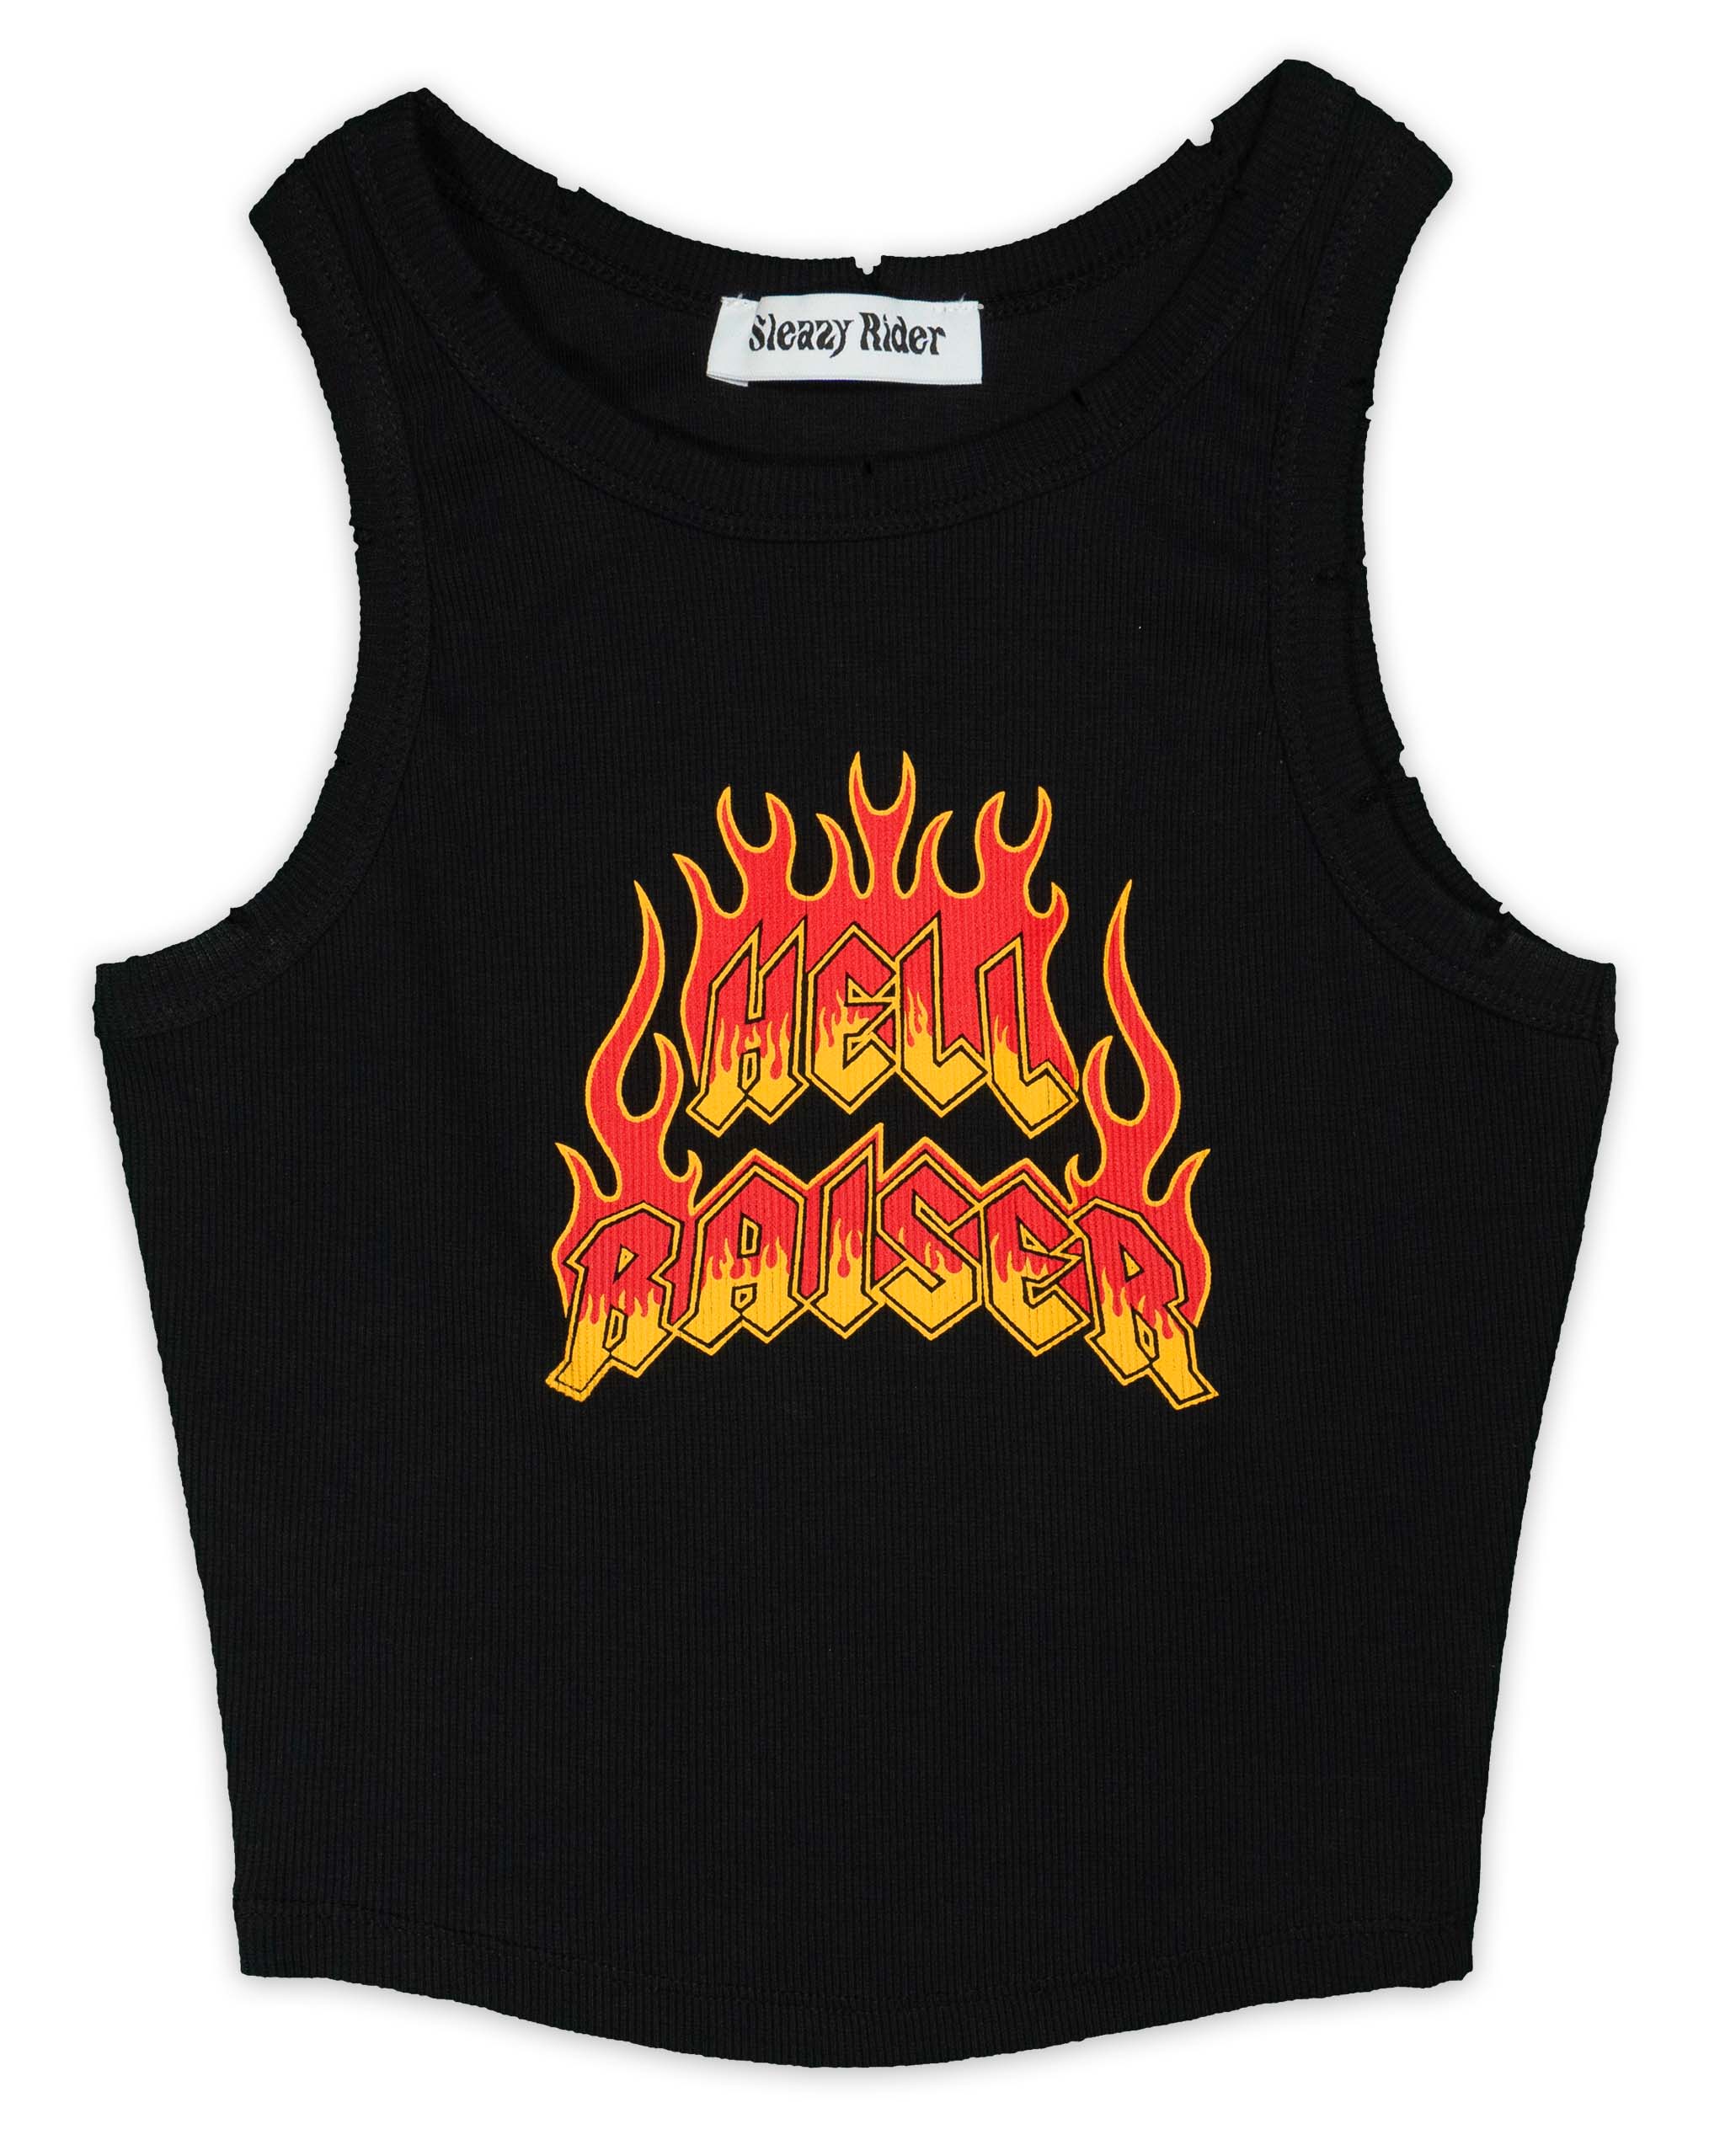 Hell Raiser tank top by Sleazy Rider, in black